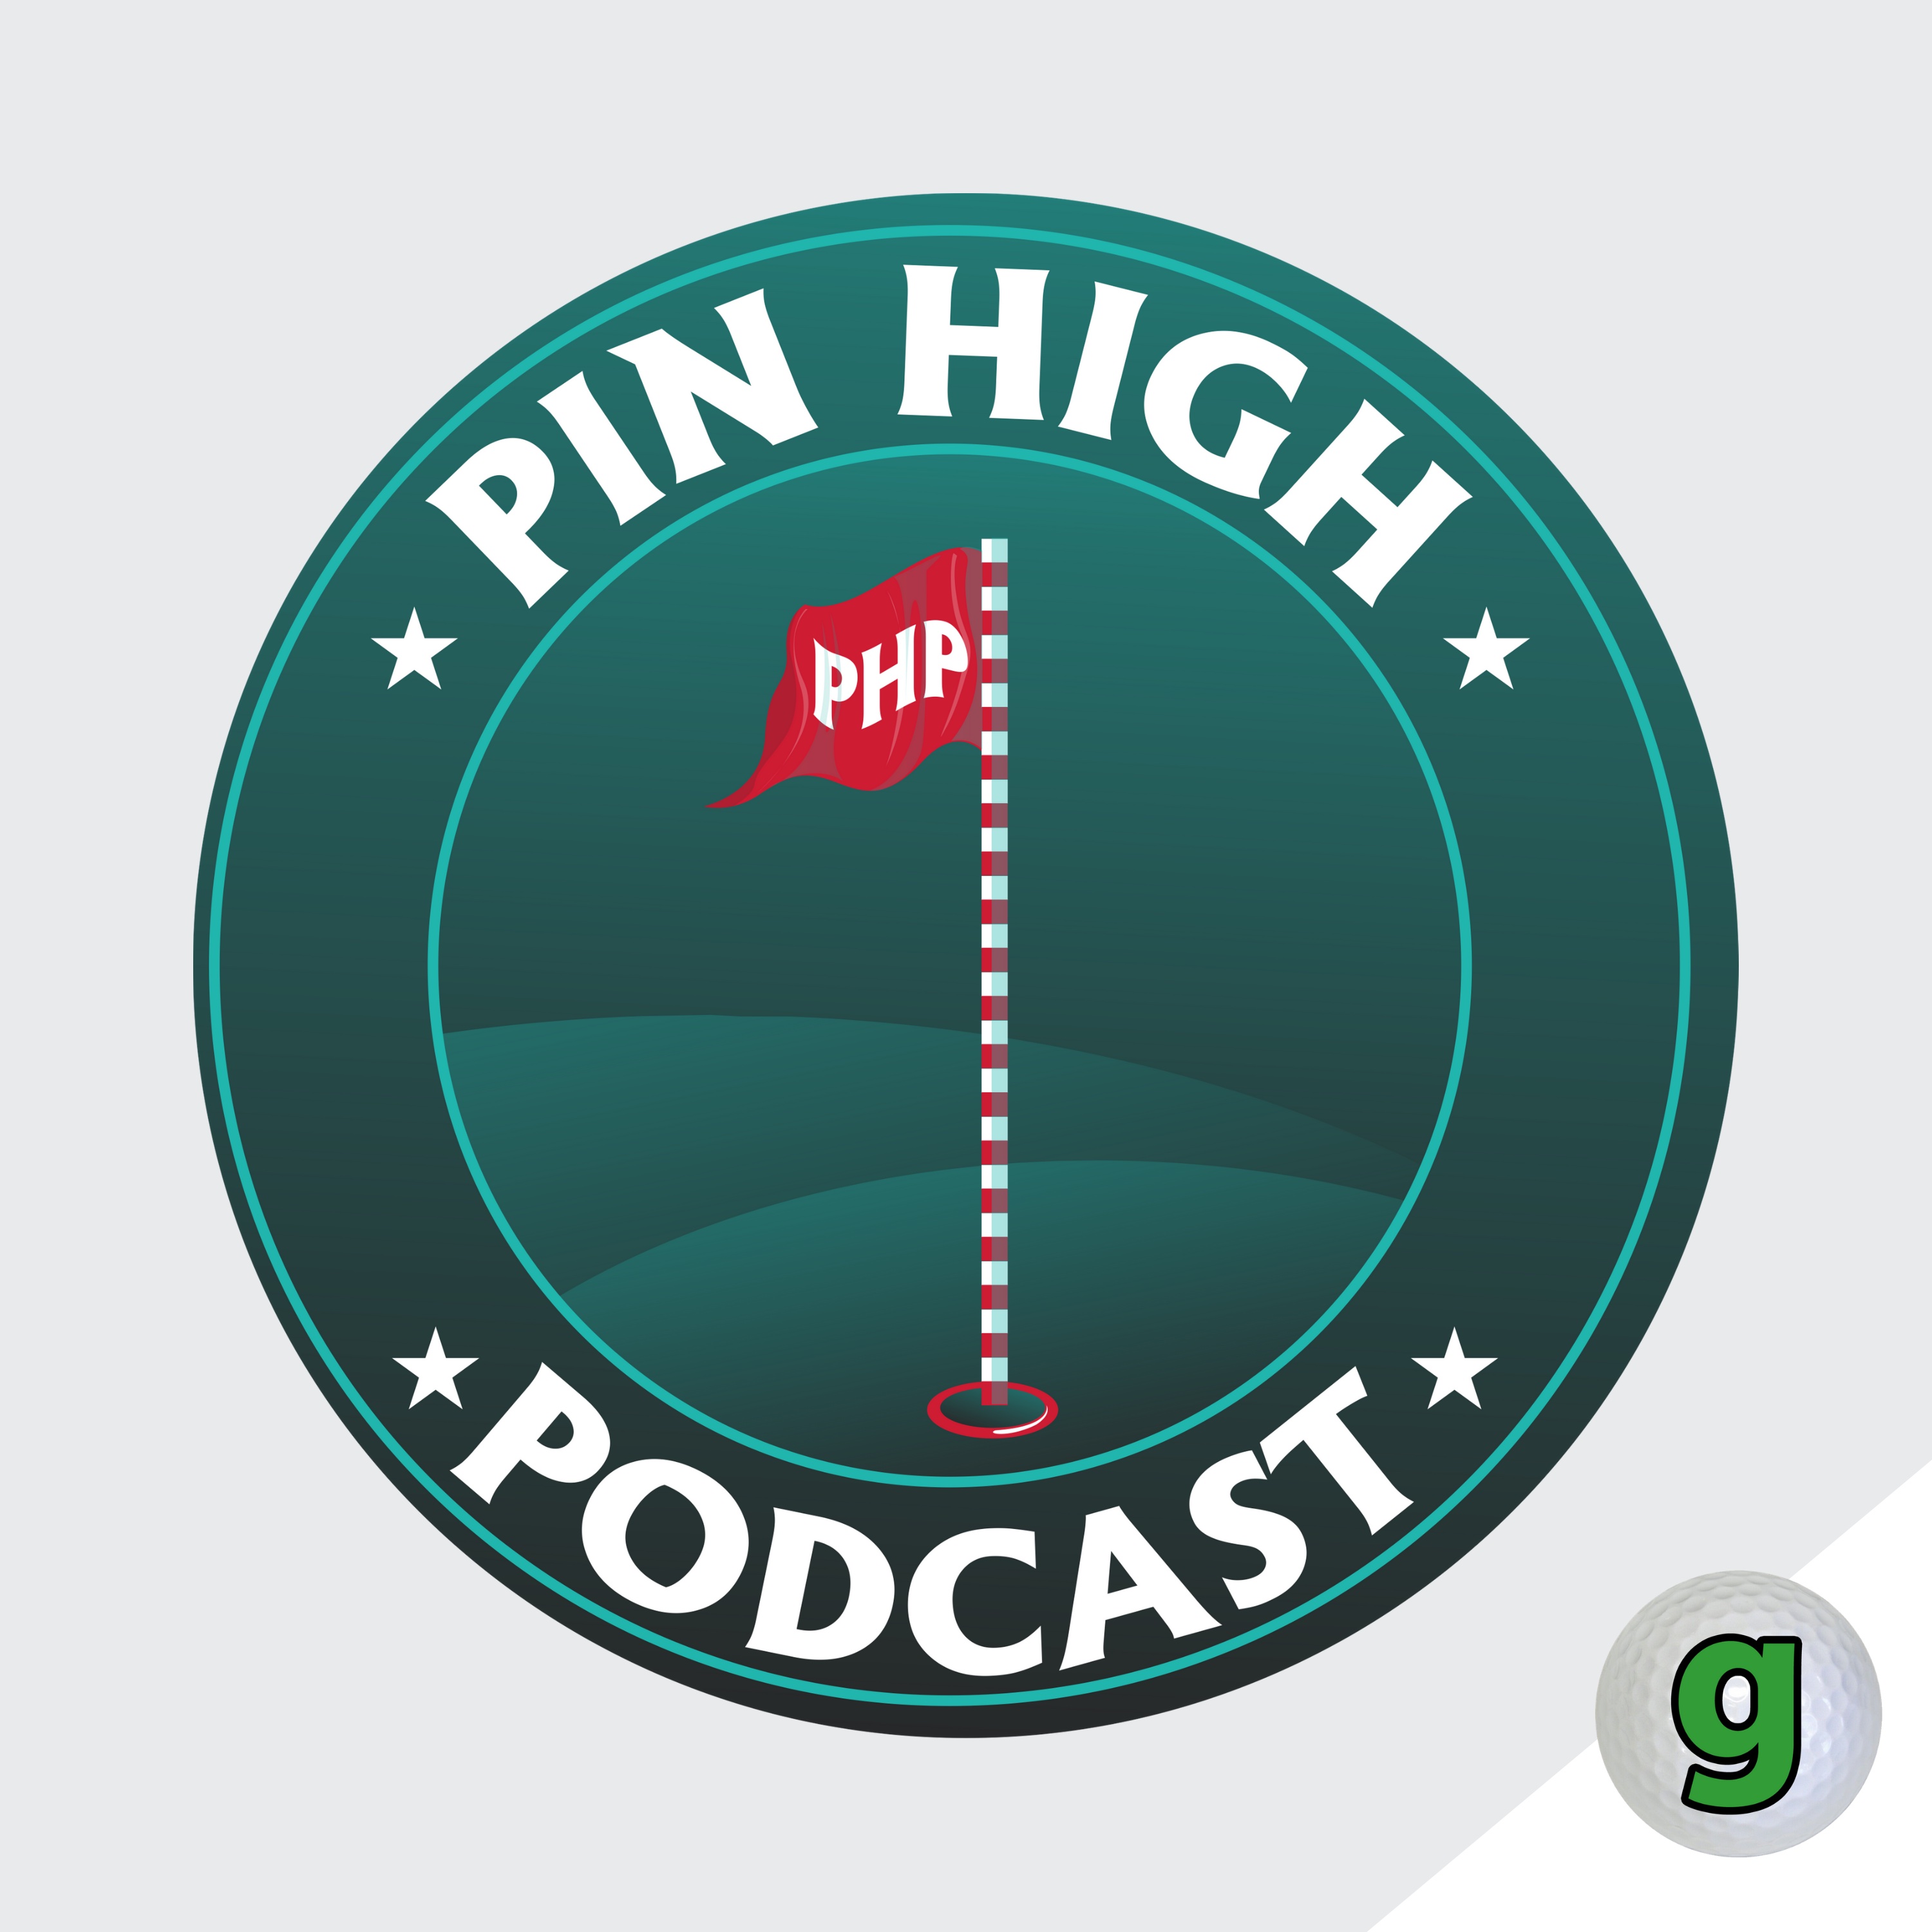 Pin High Podcast Ep. 106: Viktor Hovland Won With a Broken Driver?